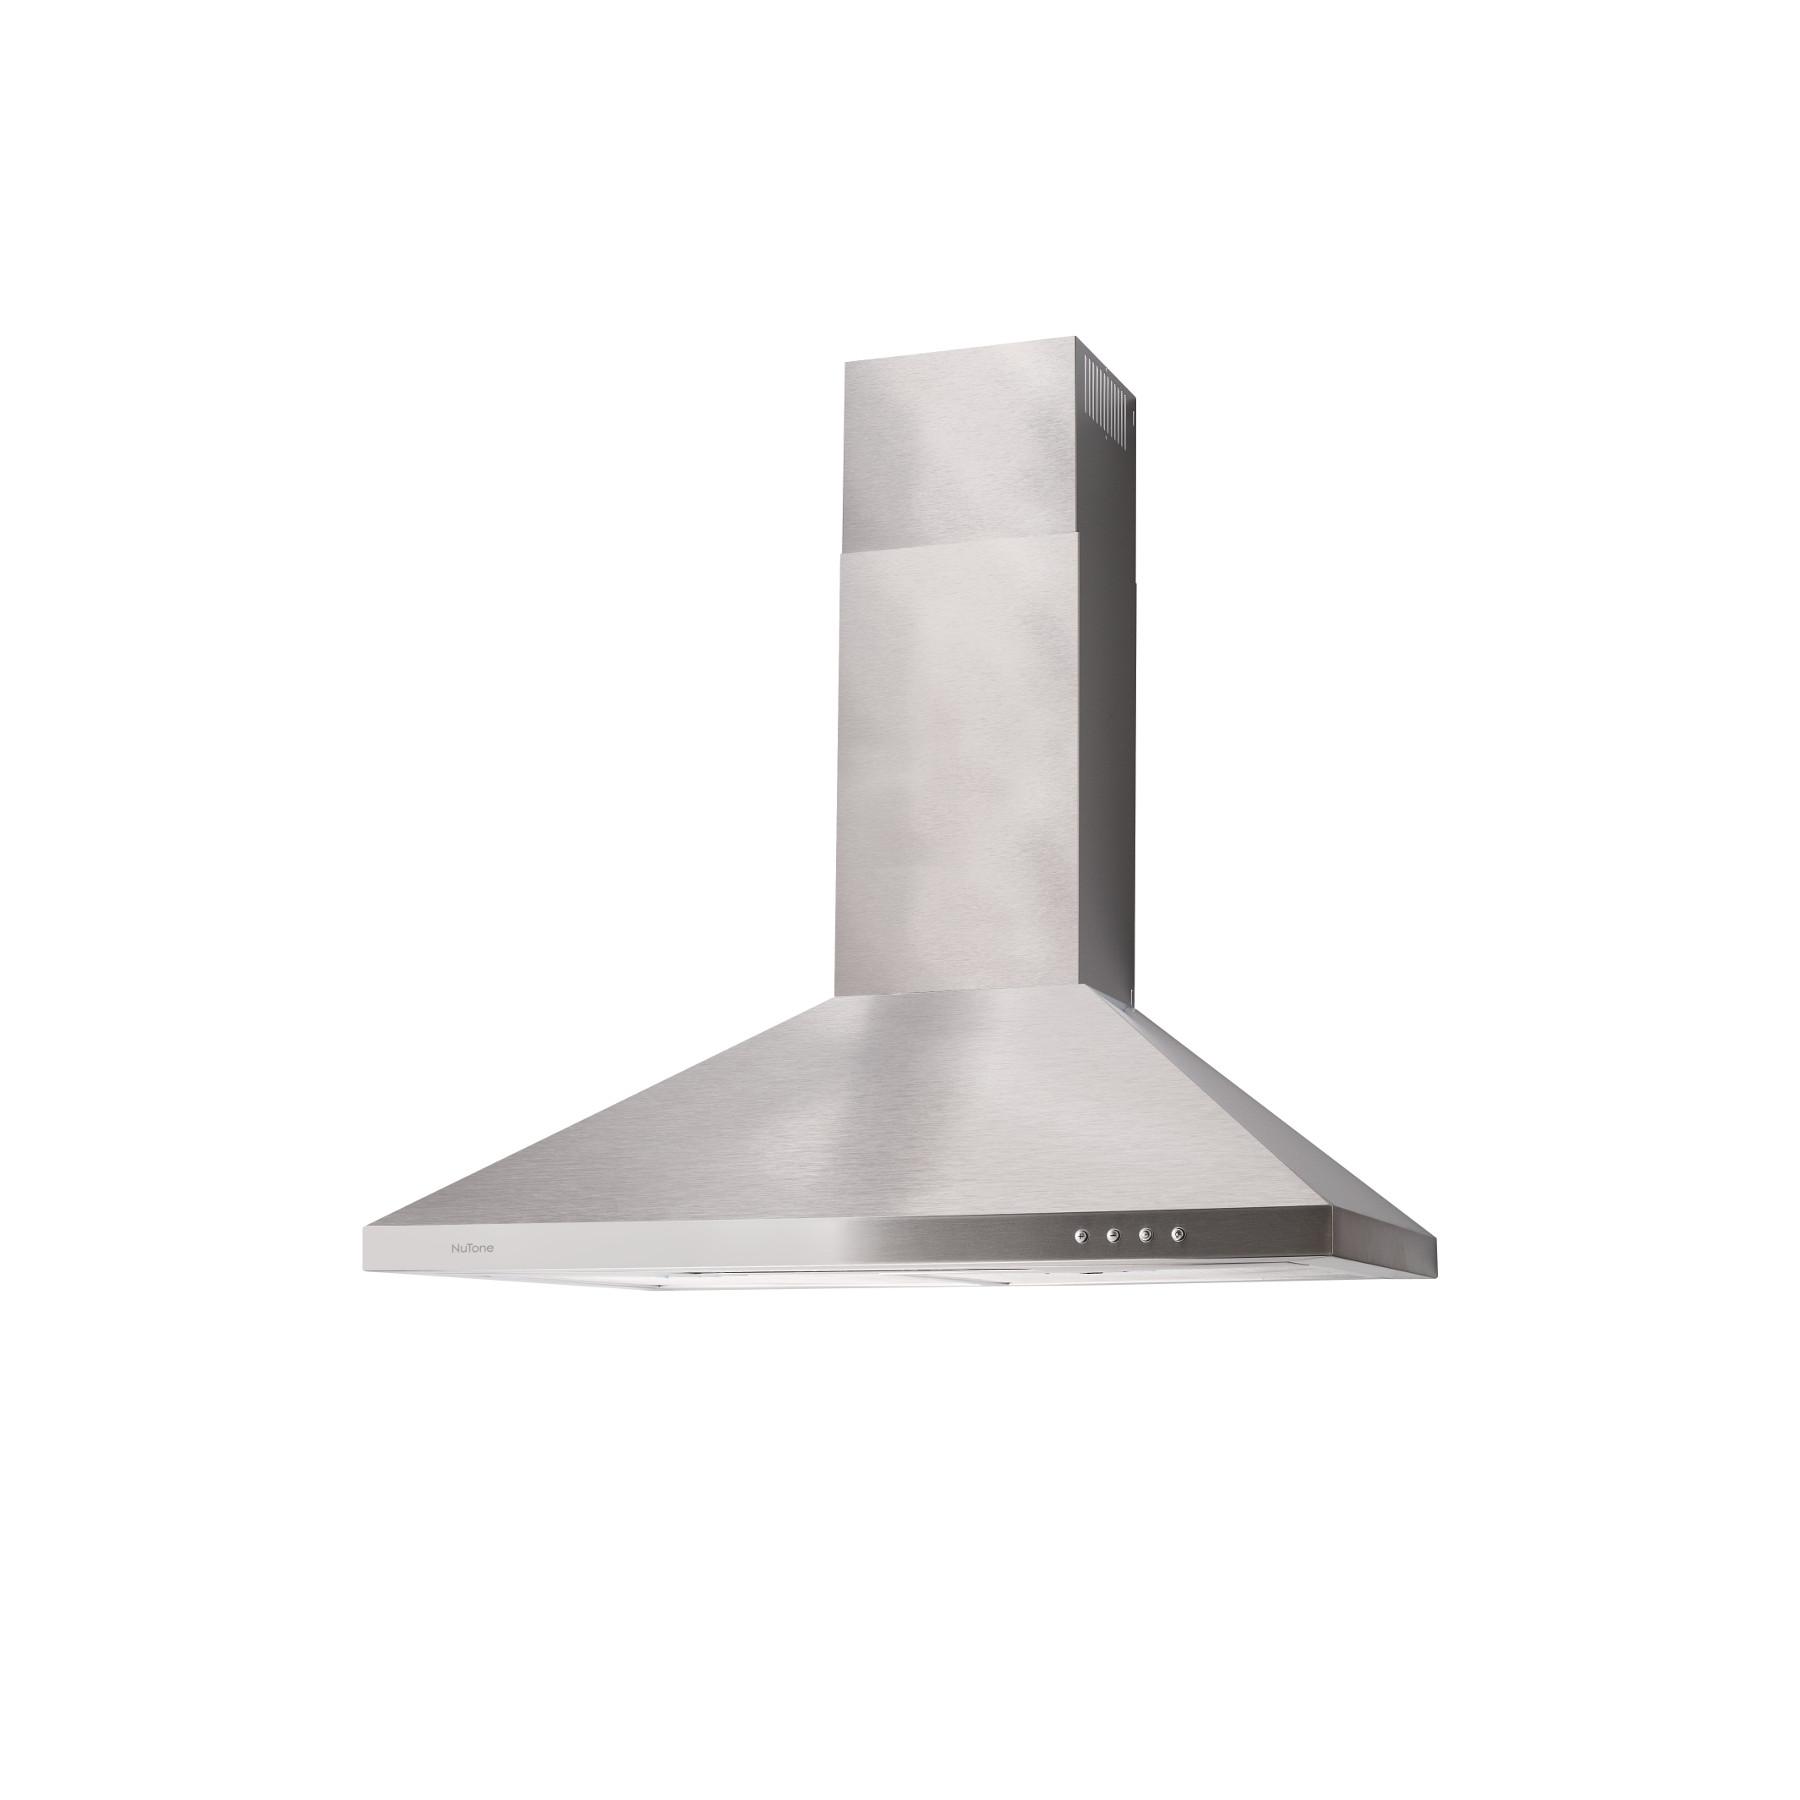 **DISCONTINUED** NuTone® 30-Inch Convertible Wall-Mount Chimney Range Hood, 350 CFM, Stainless Steel